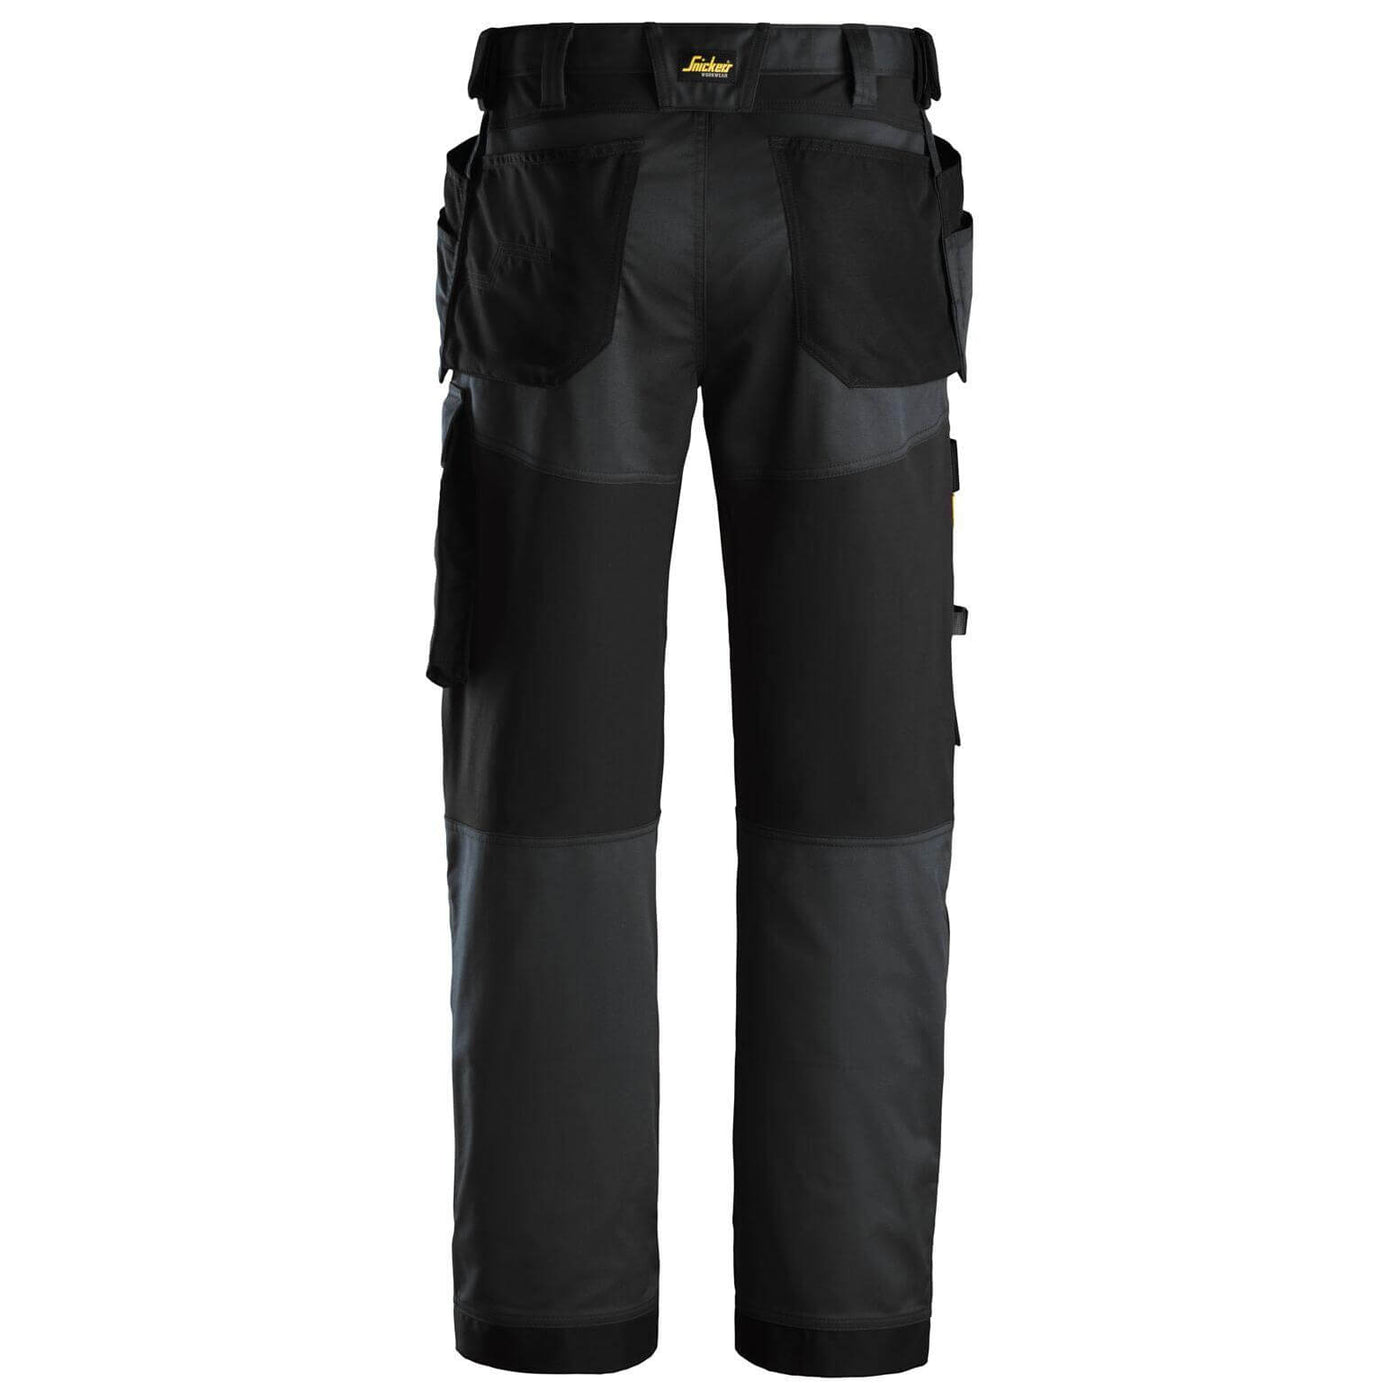 Snickers 6251 AllroundWork Stretch Loose fit Work Trousers with Holster Pockets Black Black back #colour_black-black